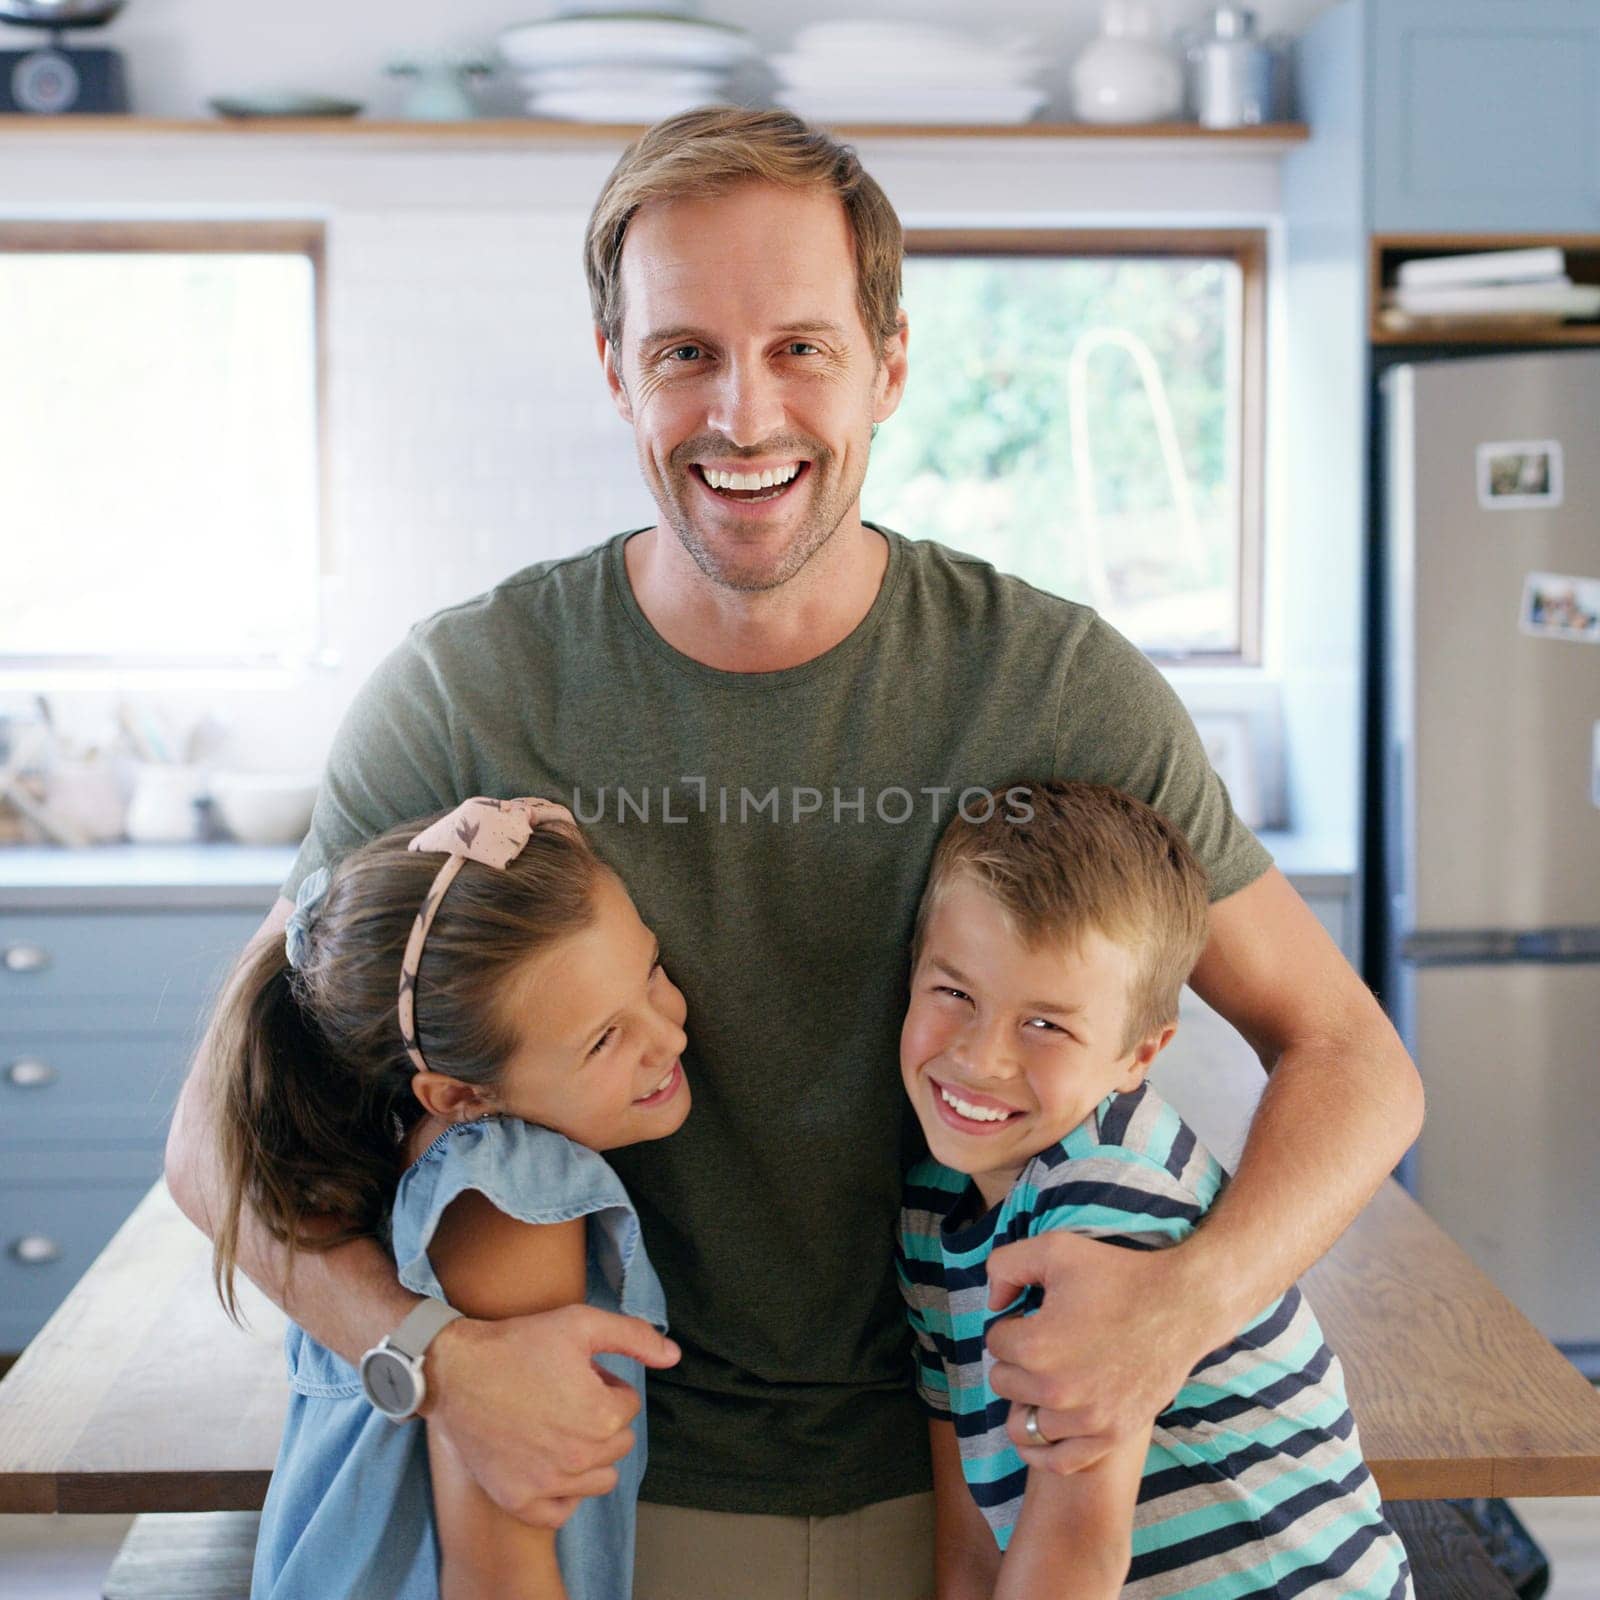 Hes a proud father. an affectionate young father embracing his two kids in their kitchen at home. by YuriArcurs